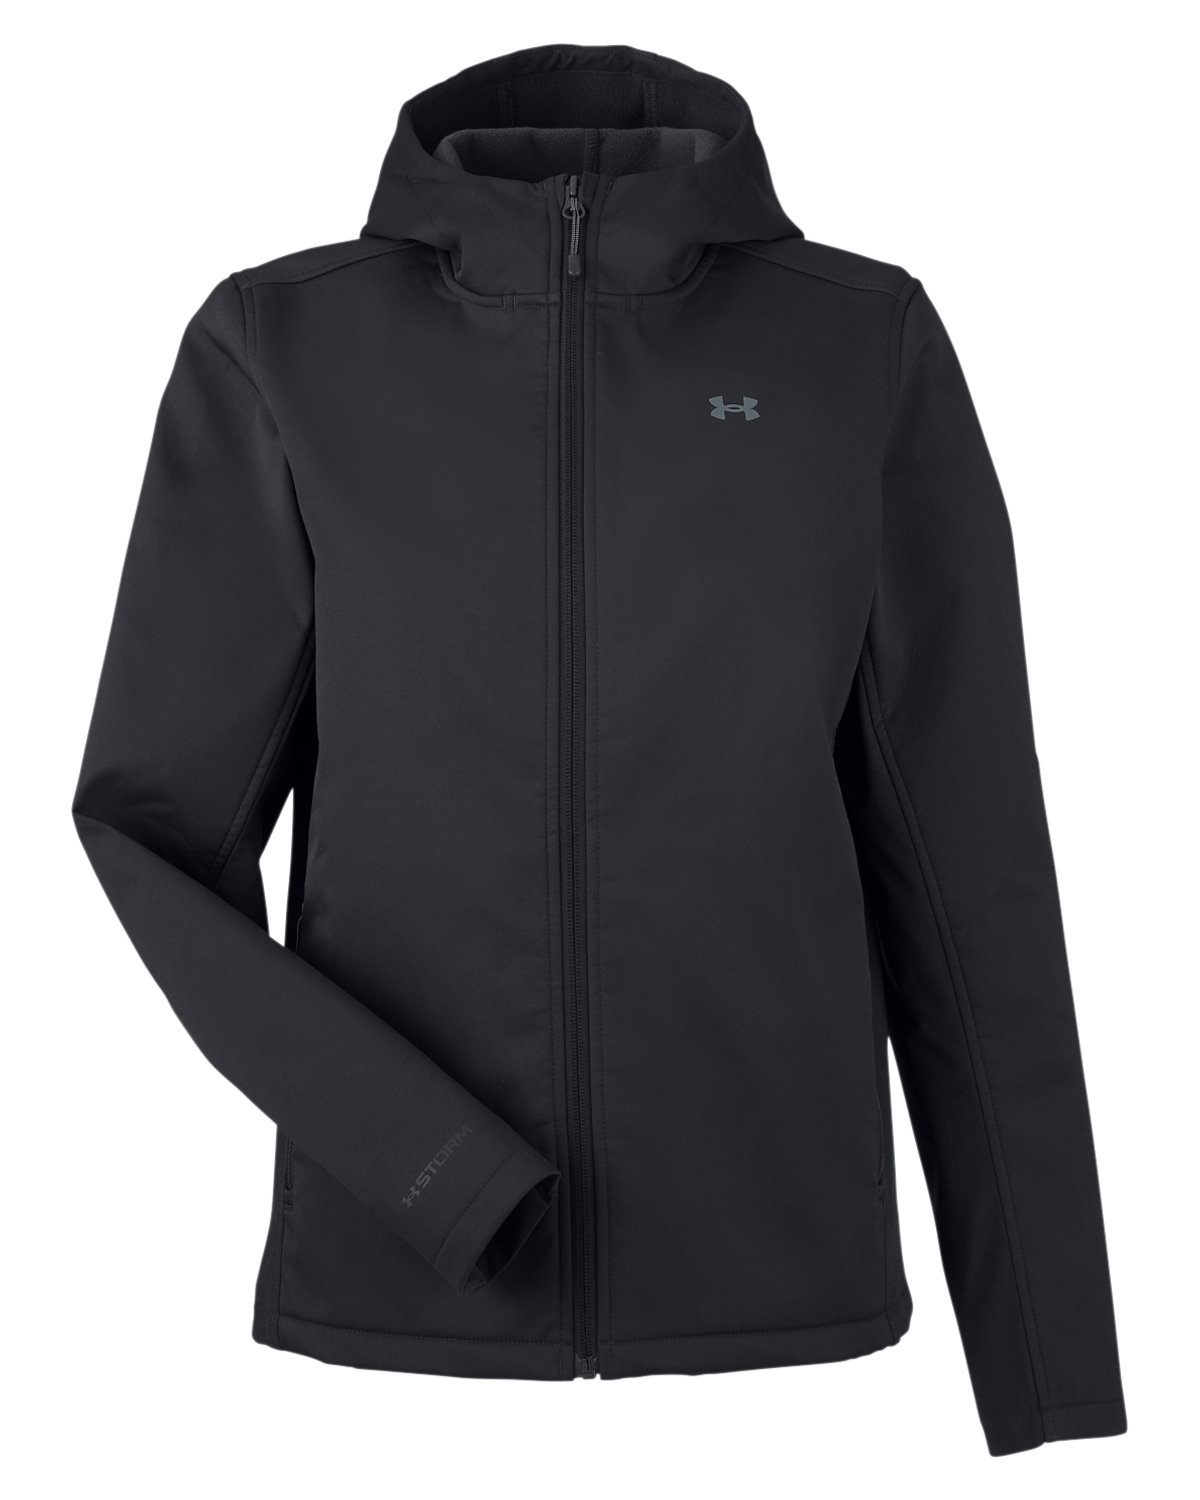 Under Armour Womens Cold Gear Storm 1/2 Zip Jacket Size Extra